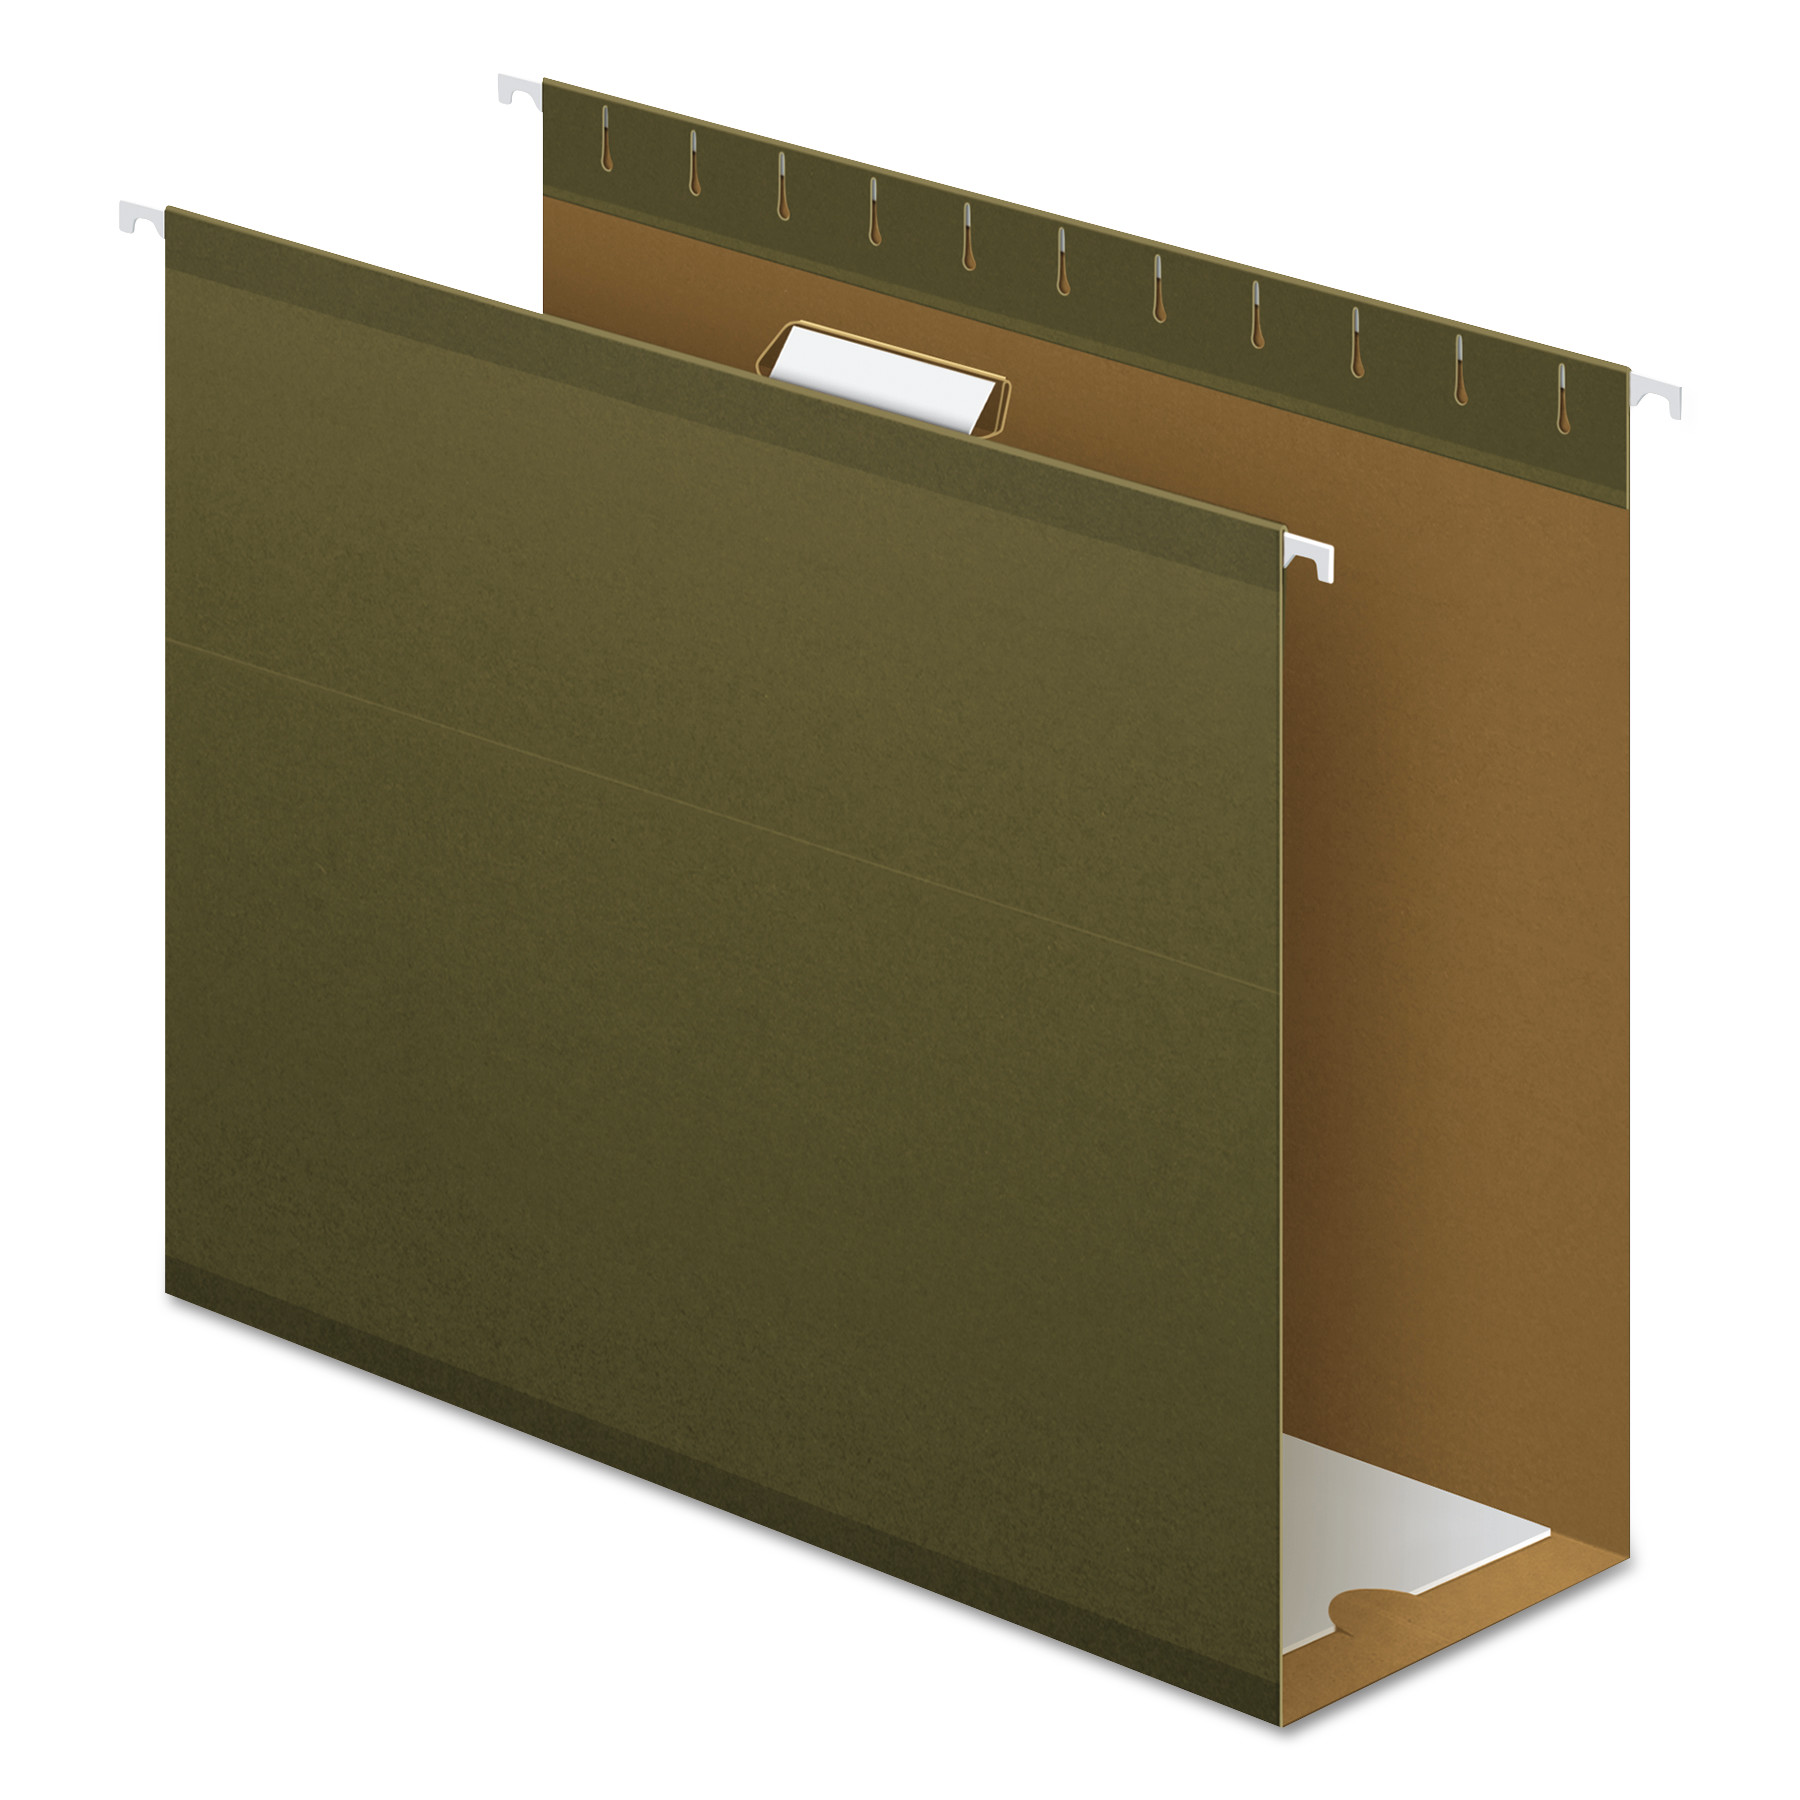  Pendaflex 04152X4 Extra Capacity Reinforced Hanging File Folders with Box Bottom, Letter Size, 1/5-Cut Tab, Standard Green, 25/Box (PFX4152X4) 